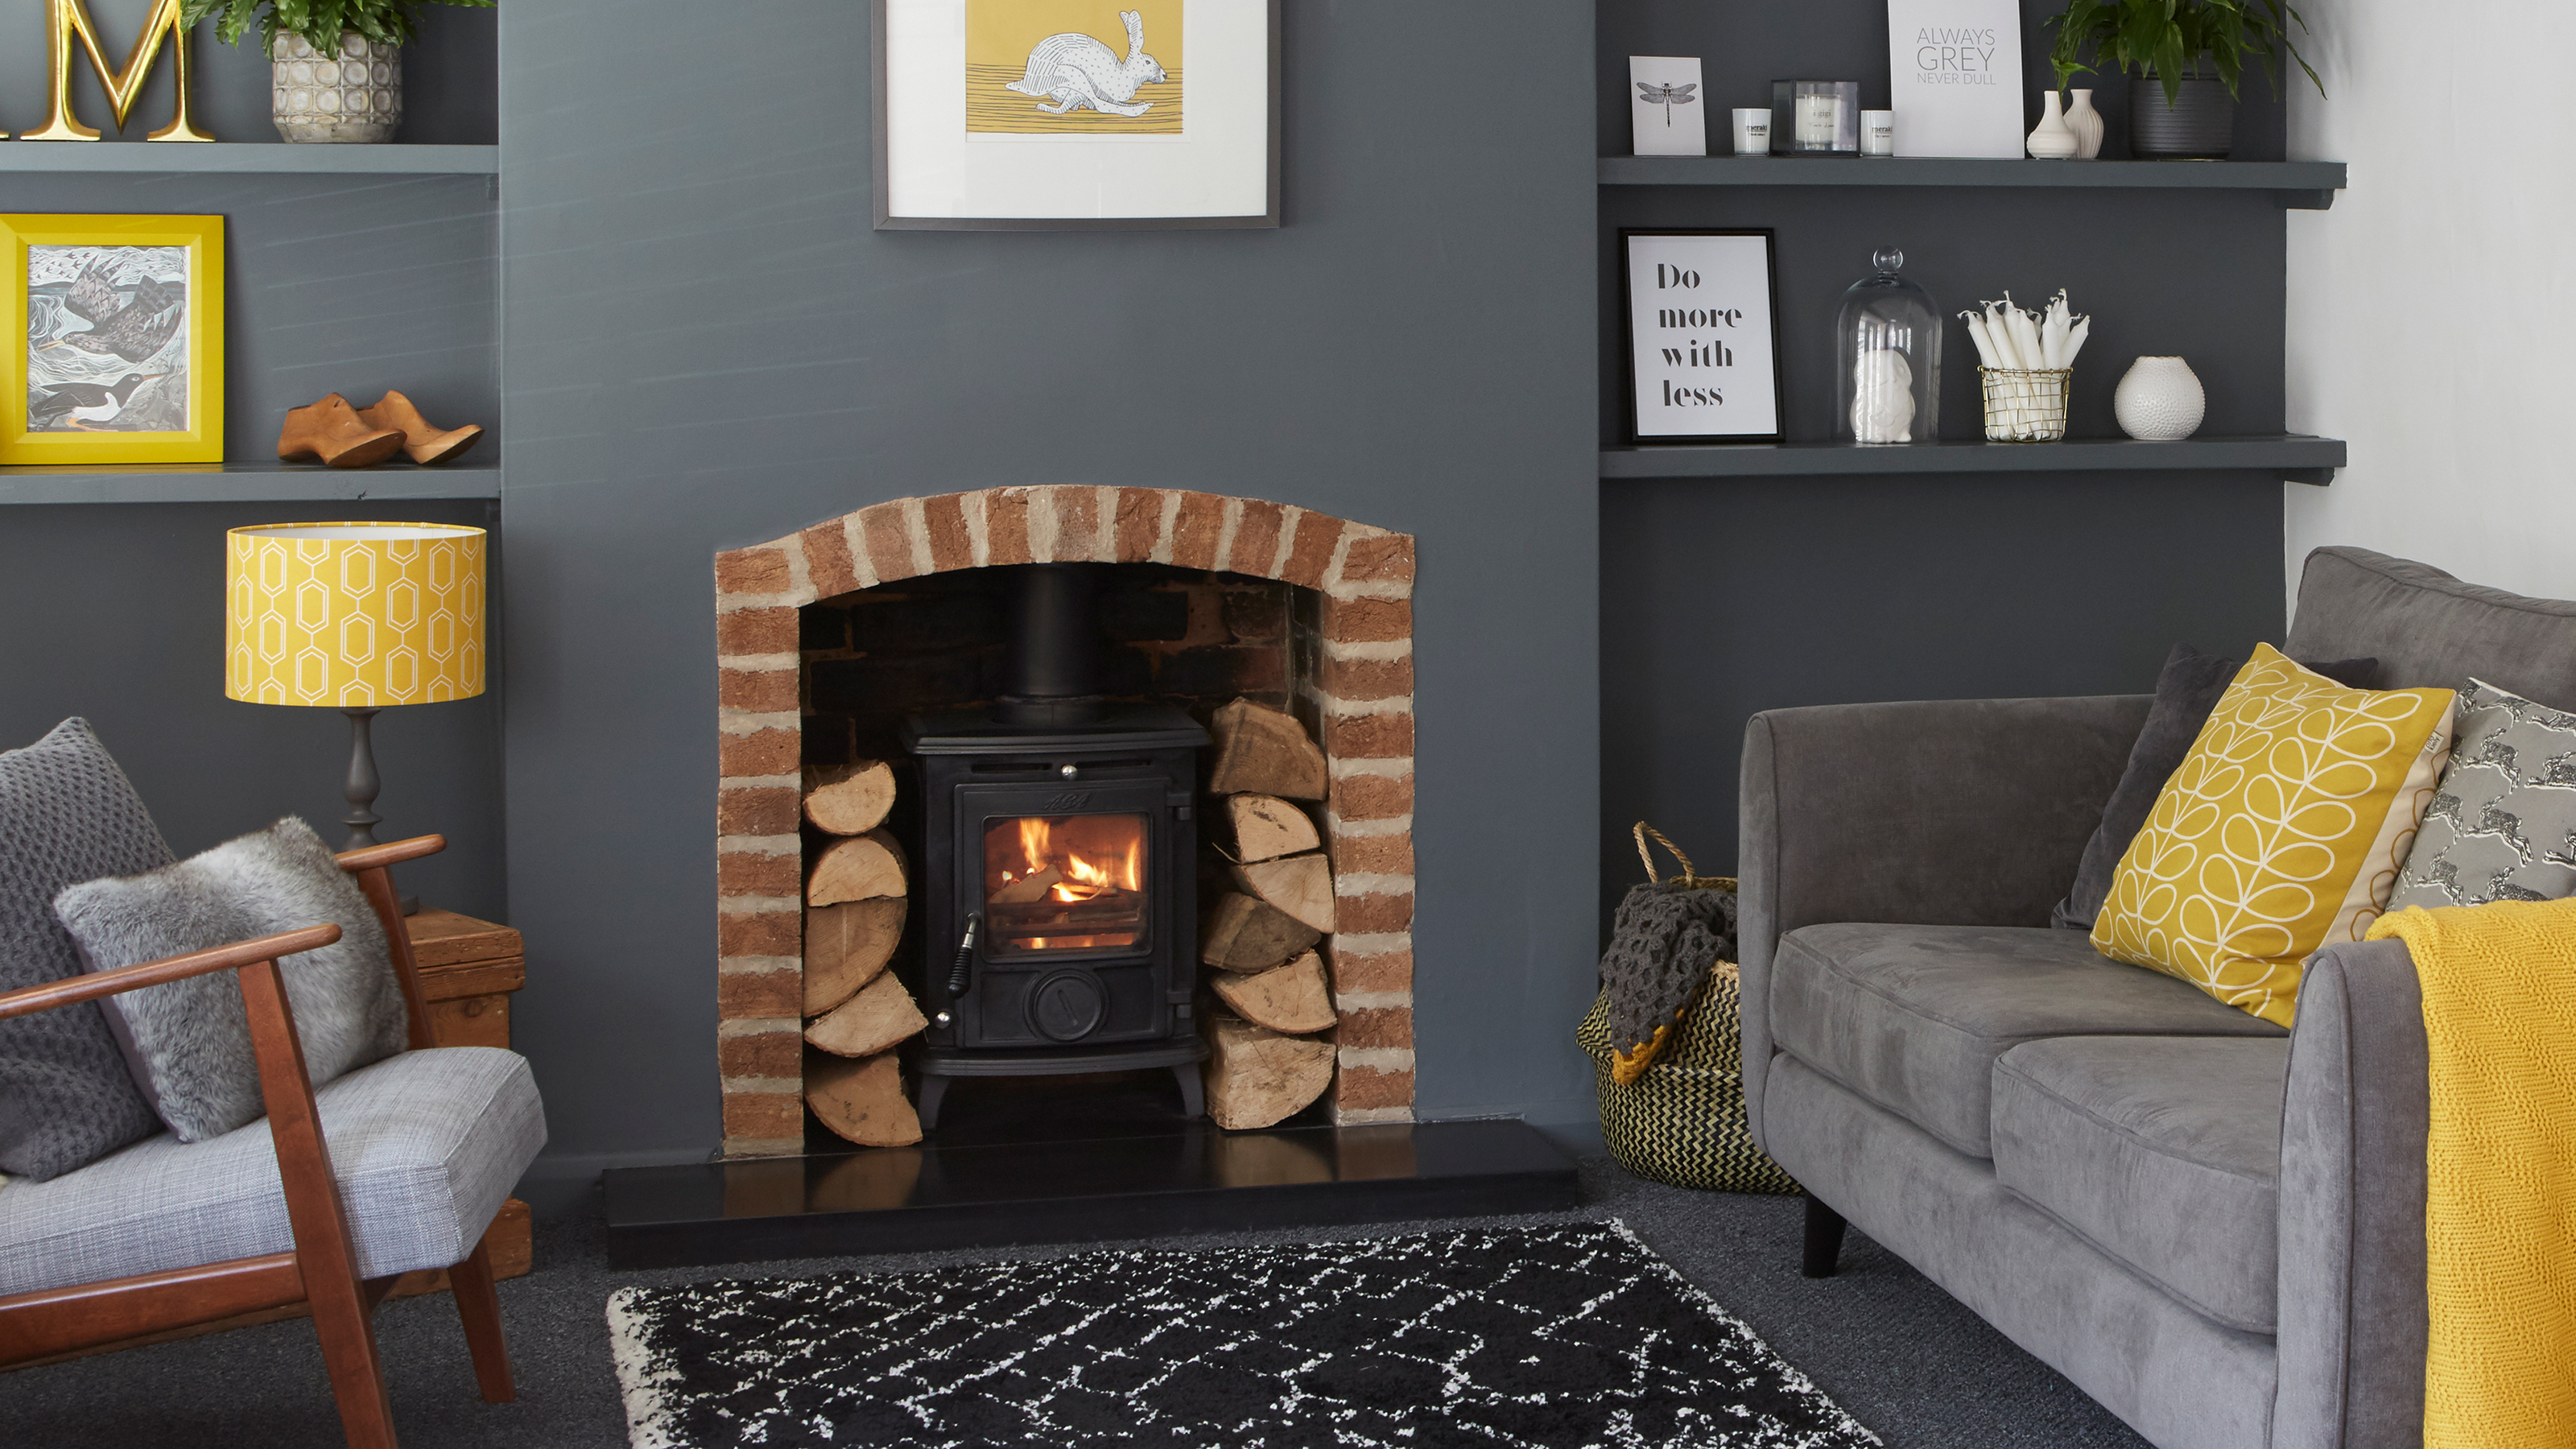 Replacing your wood burner? Make sure it's an Ecodesign ready